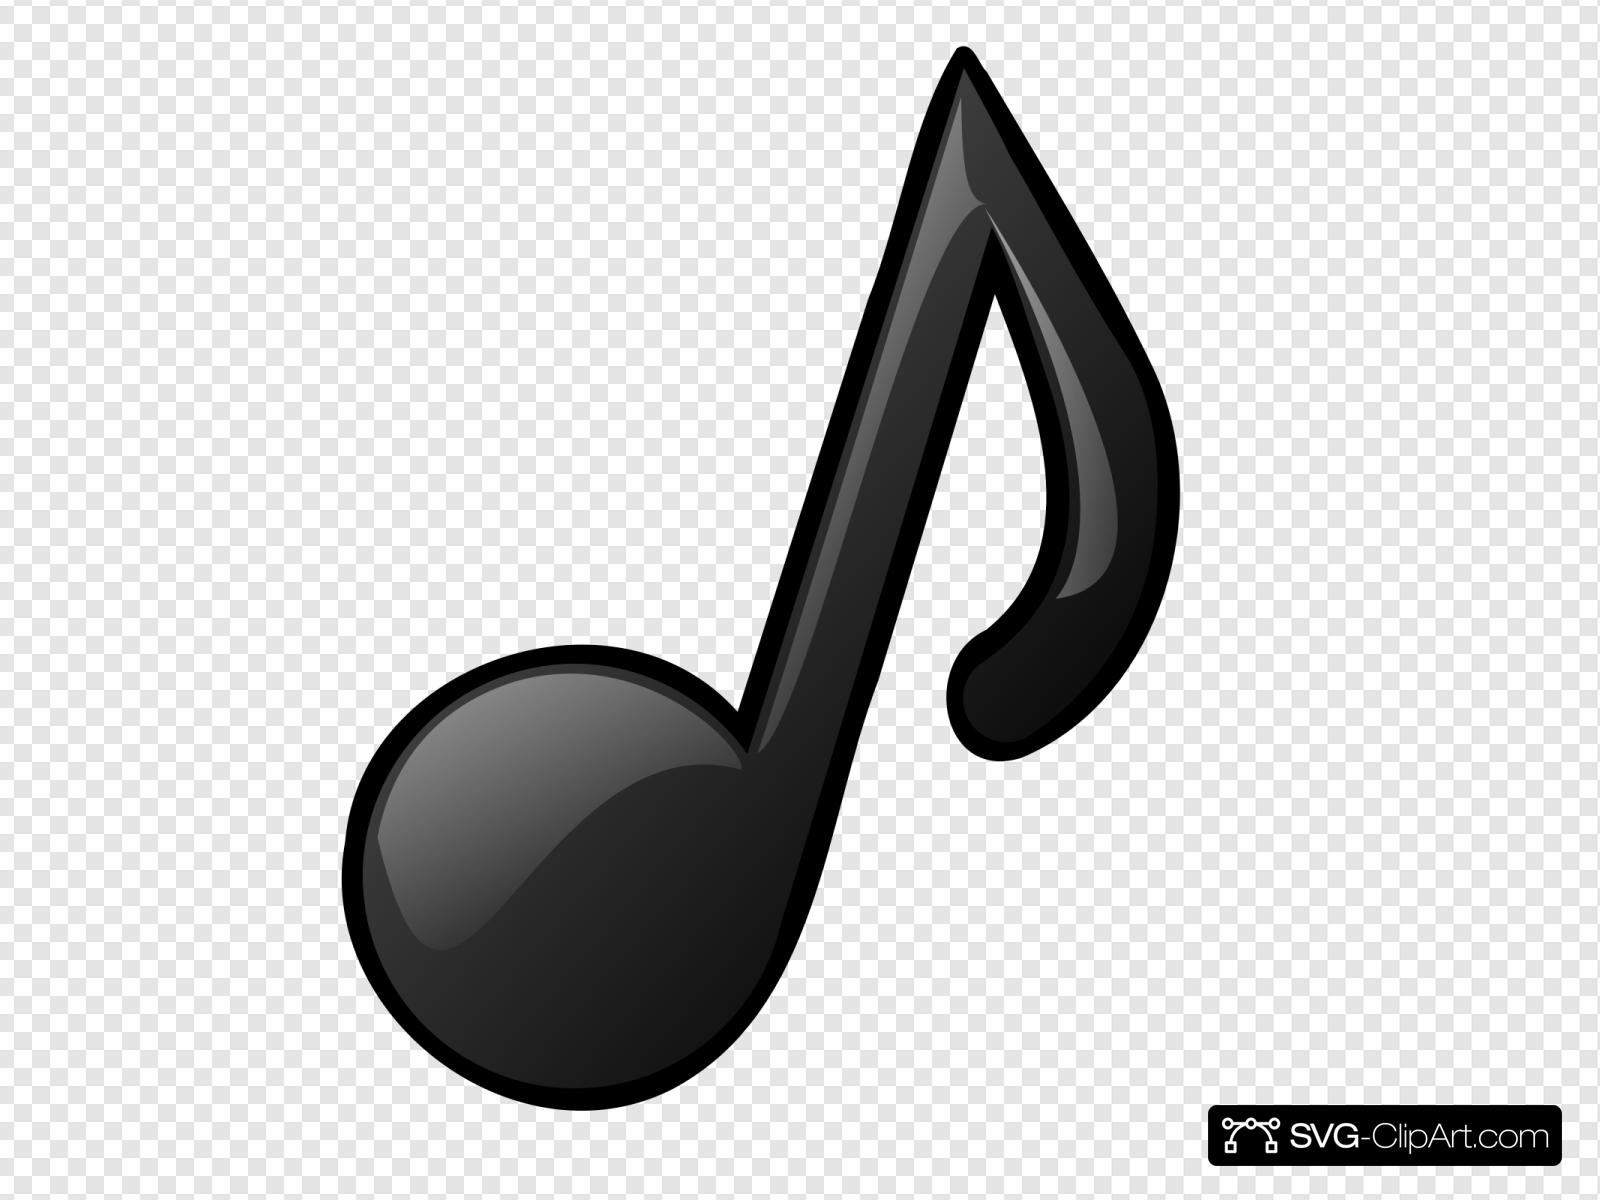 Musical Note Clip art, Icon and SVG.